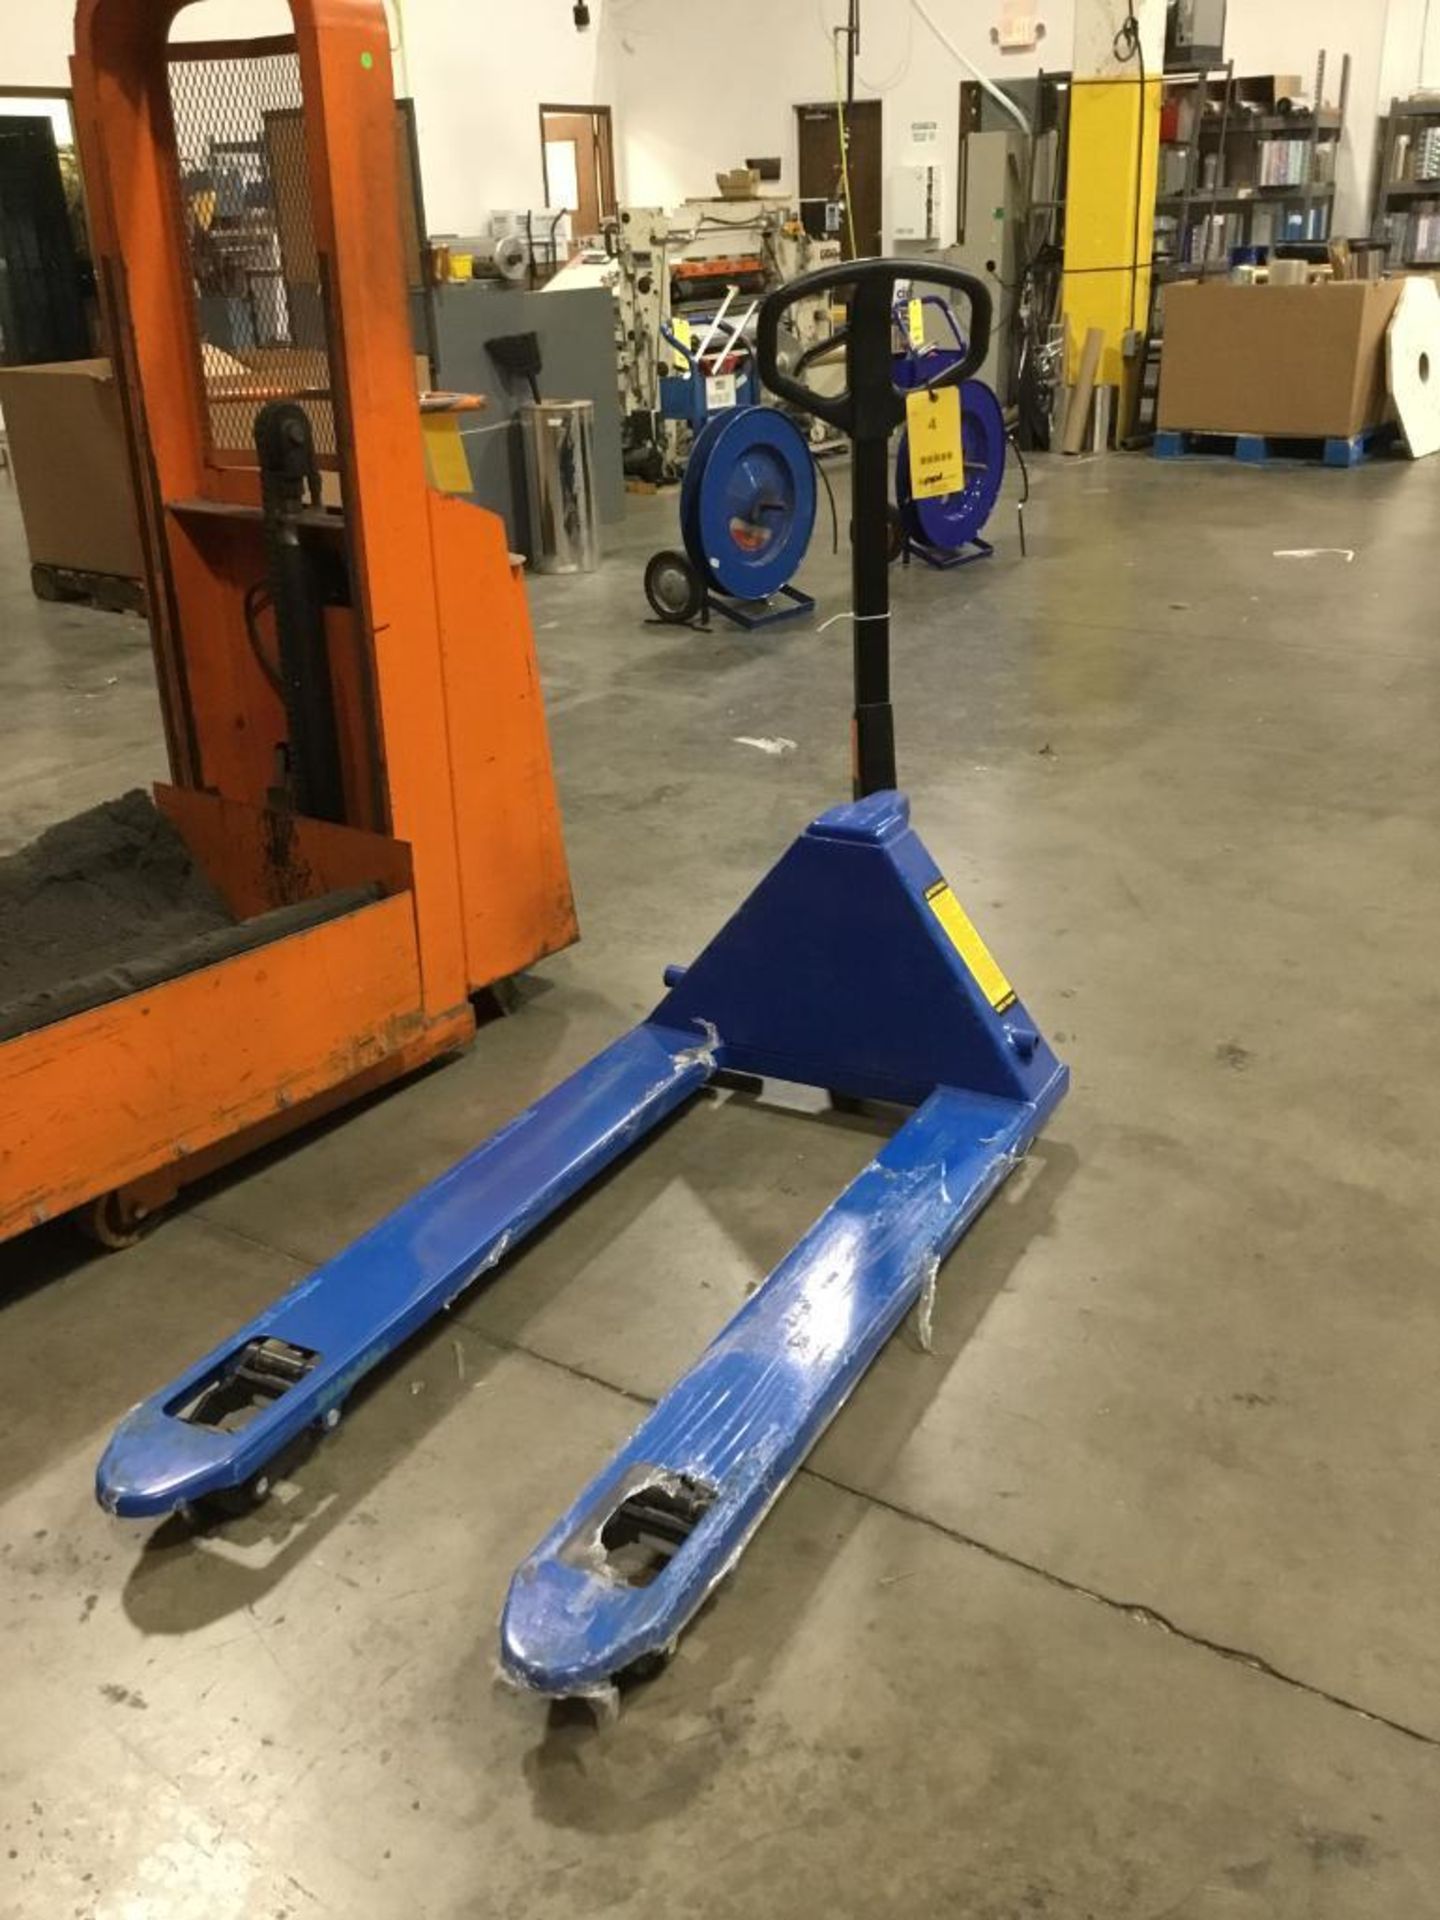 Global 26.75 in. x 48 in. 5,500 Pallet Jack S/N P699476 (LOCATED IN PA)